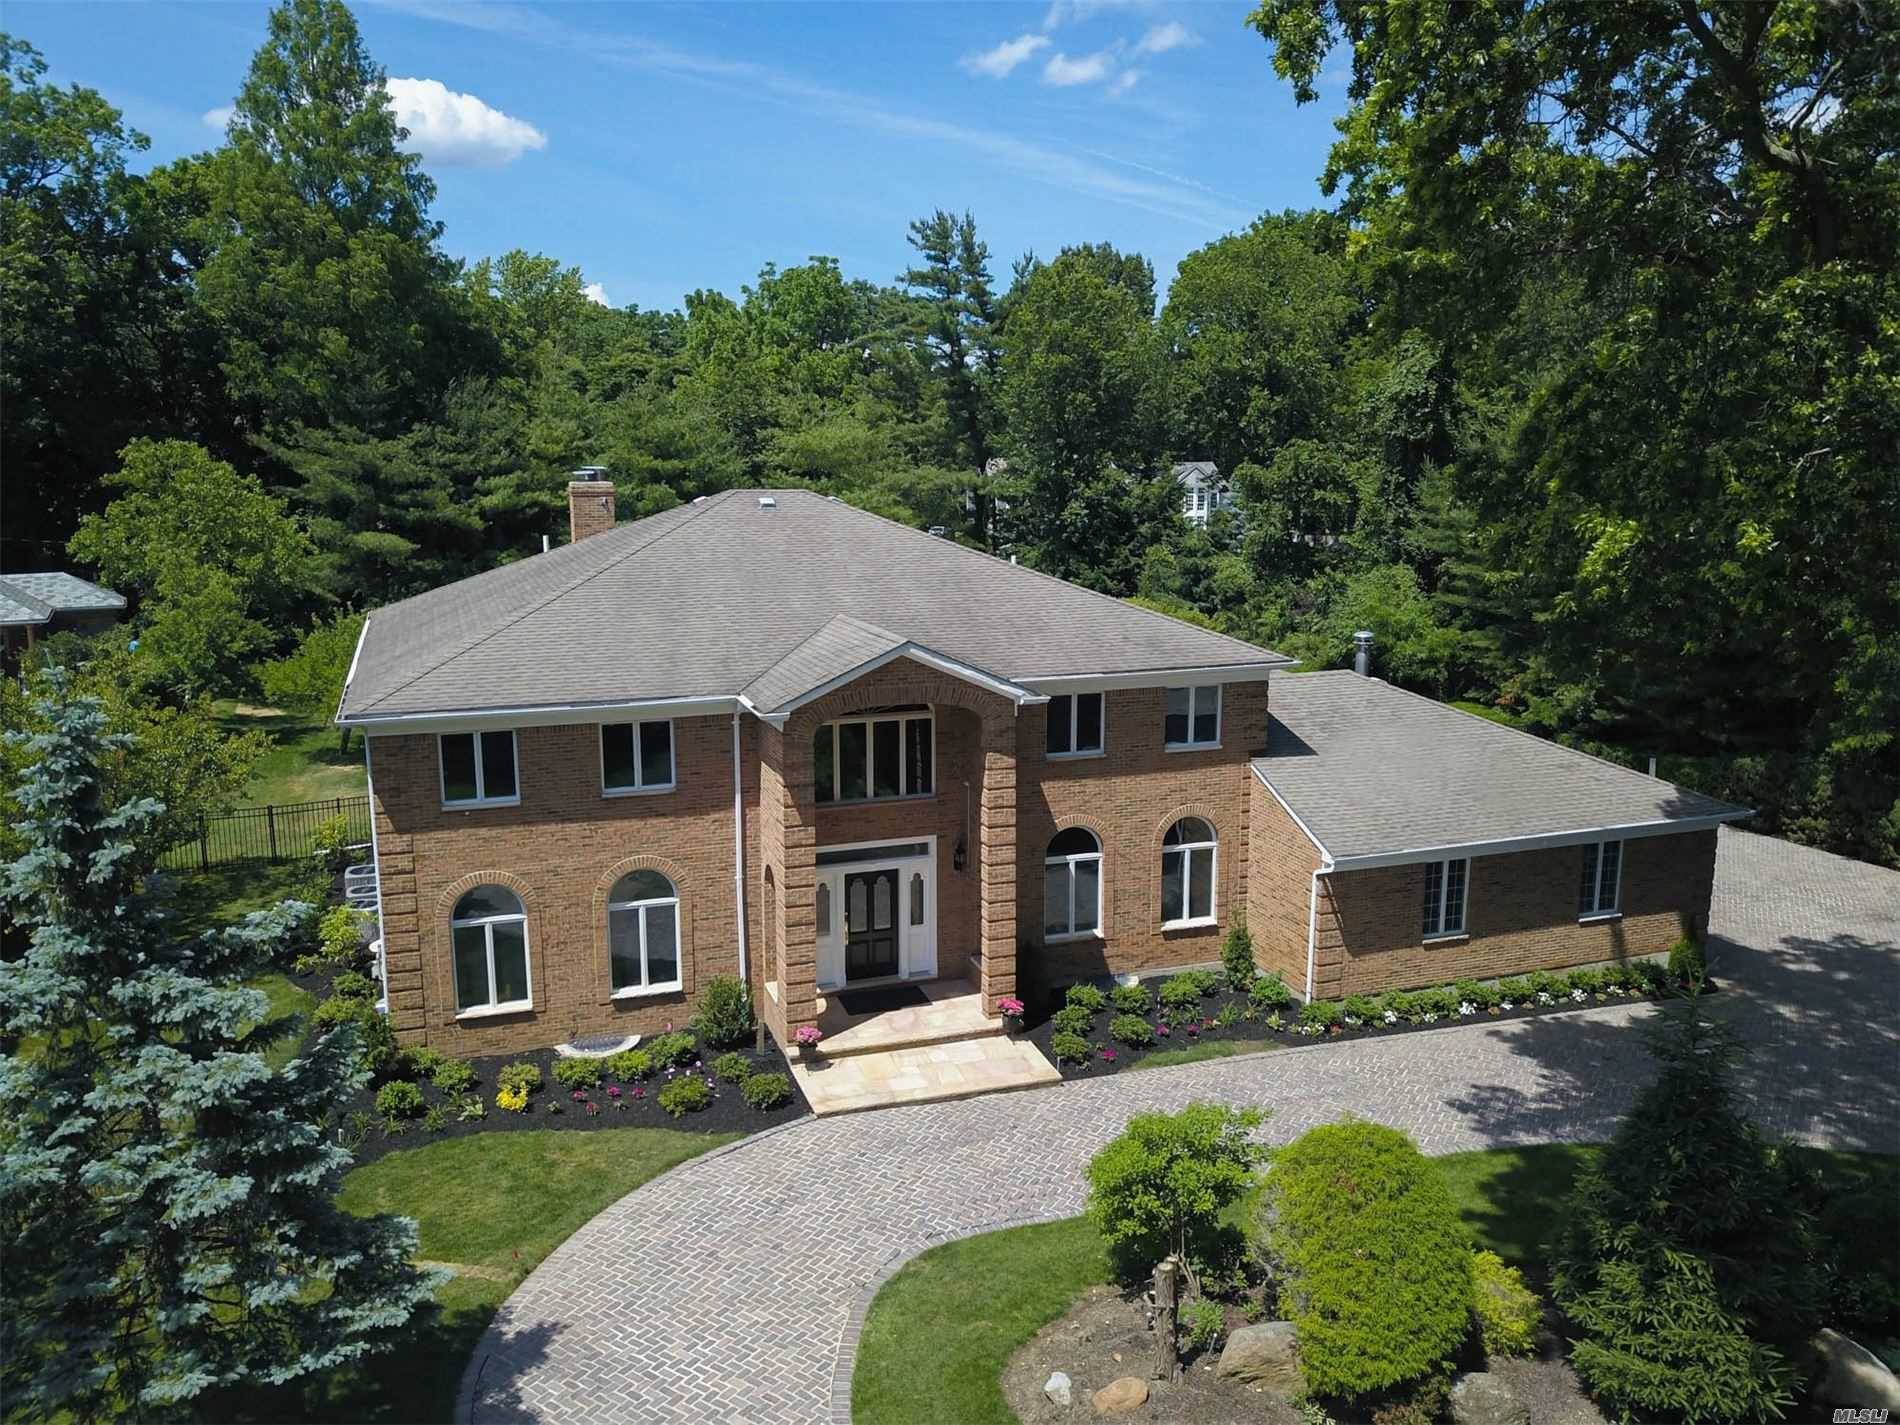 The living is easy in this impressive, generously proportioned colonial residence on park like property, located on prestigious Elderfields Road.